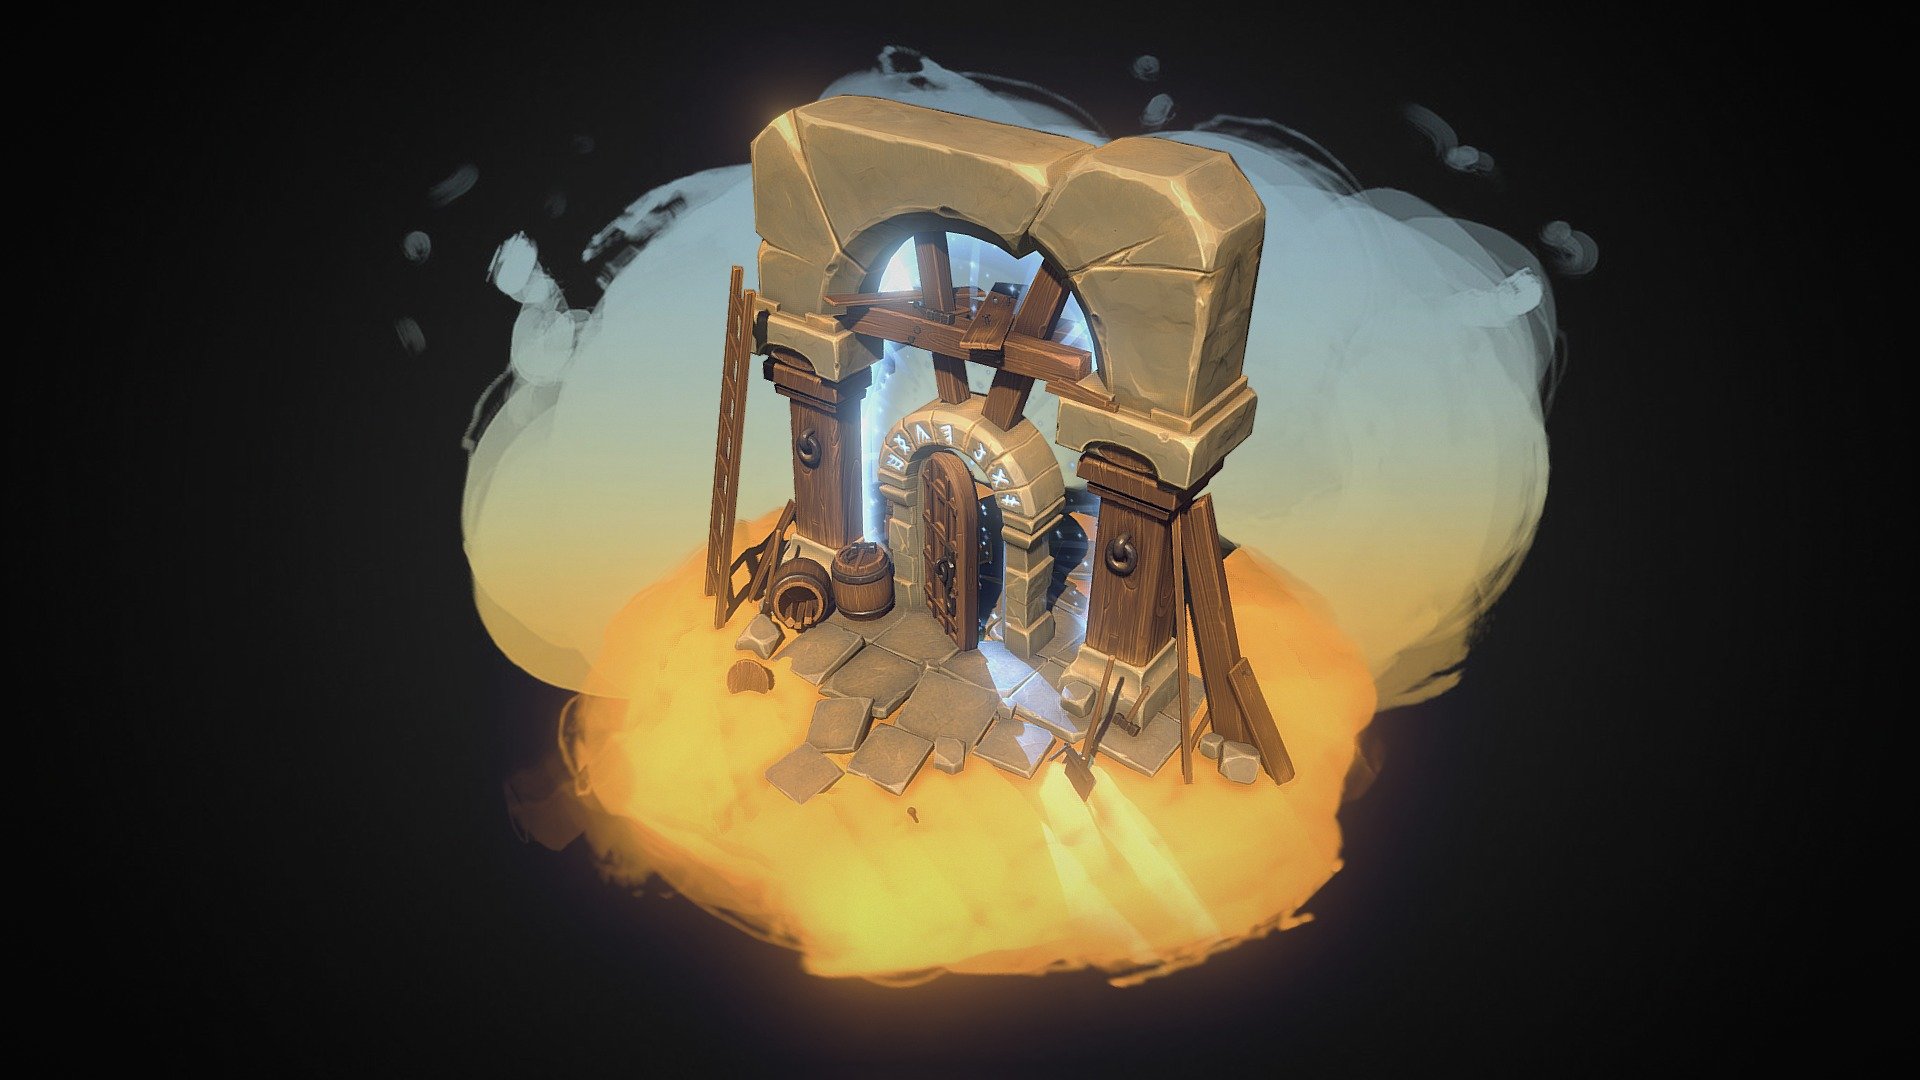 Glad that i've finished this haha. Here is WIP thread on Polycount: http://polycount.com/discussion/190290/wip-desert-portal

More info like sculpts shots and textures on artstation: https://www.artstation.com/artwork/zeAEm
Hope you will like it :) - Desert Portal - 3D model by qwedeath 3d model